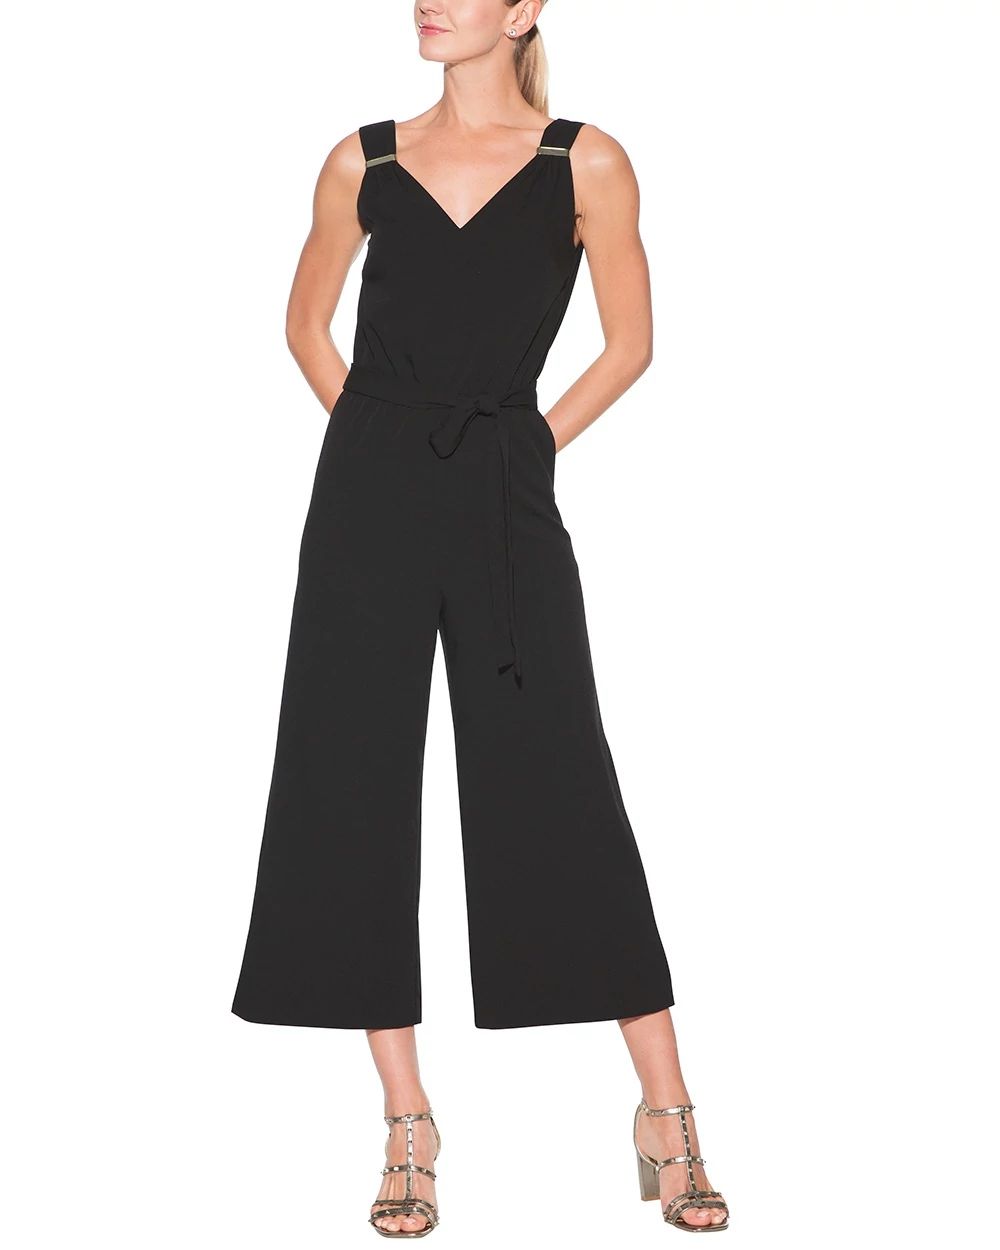 Outlet WHBM Sleeveless-Detail Crop Jumpsuit